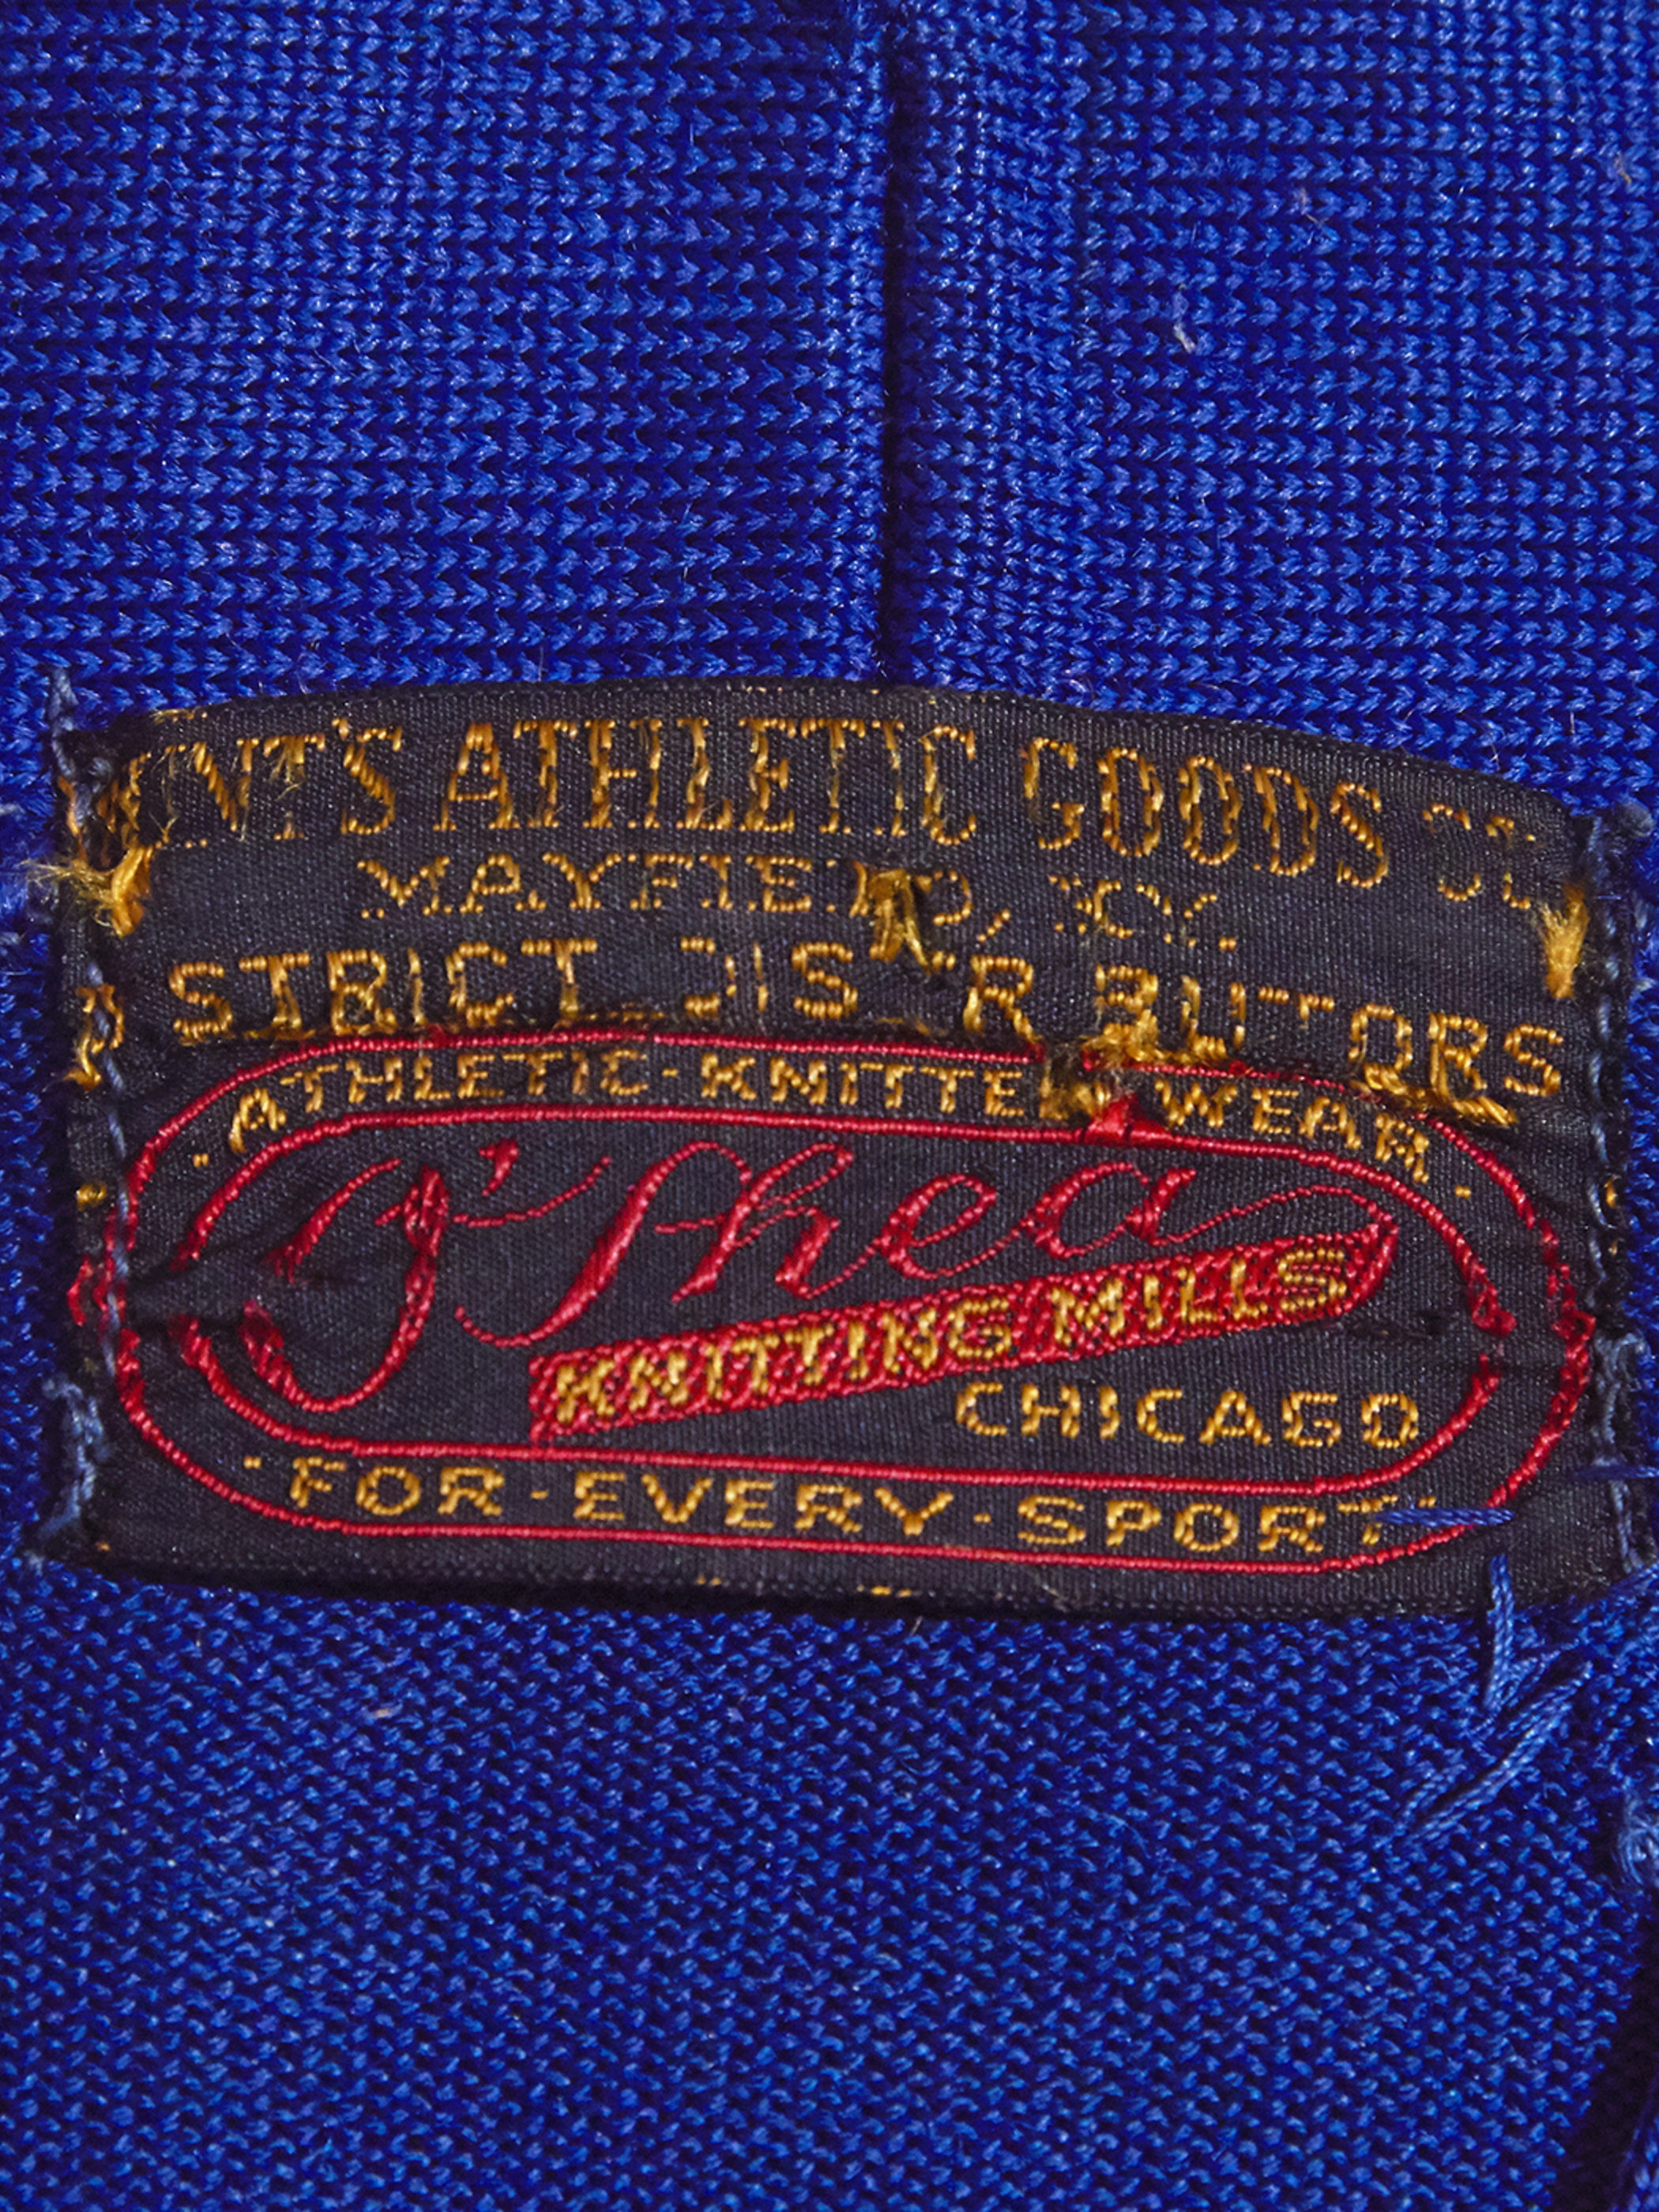 1950s "unknown" wool lettered knit cardigan -BLUE-